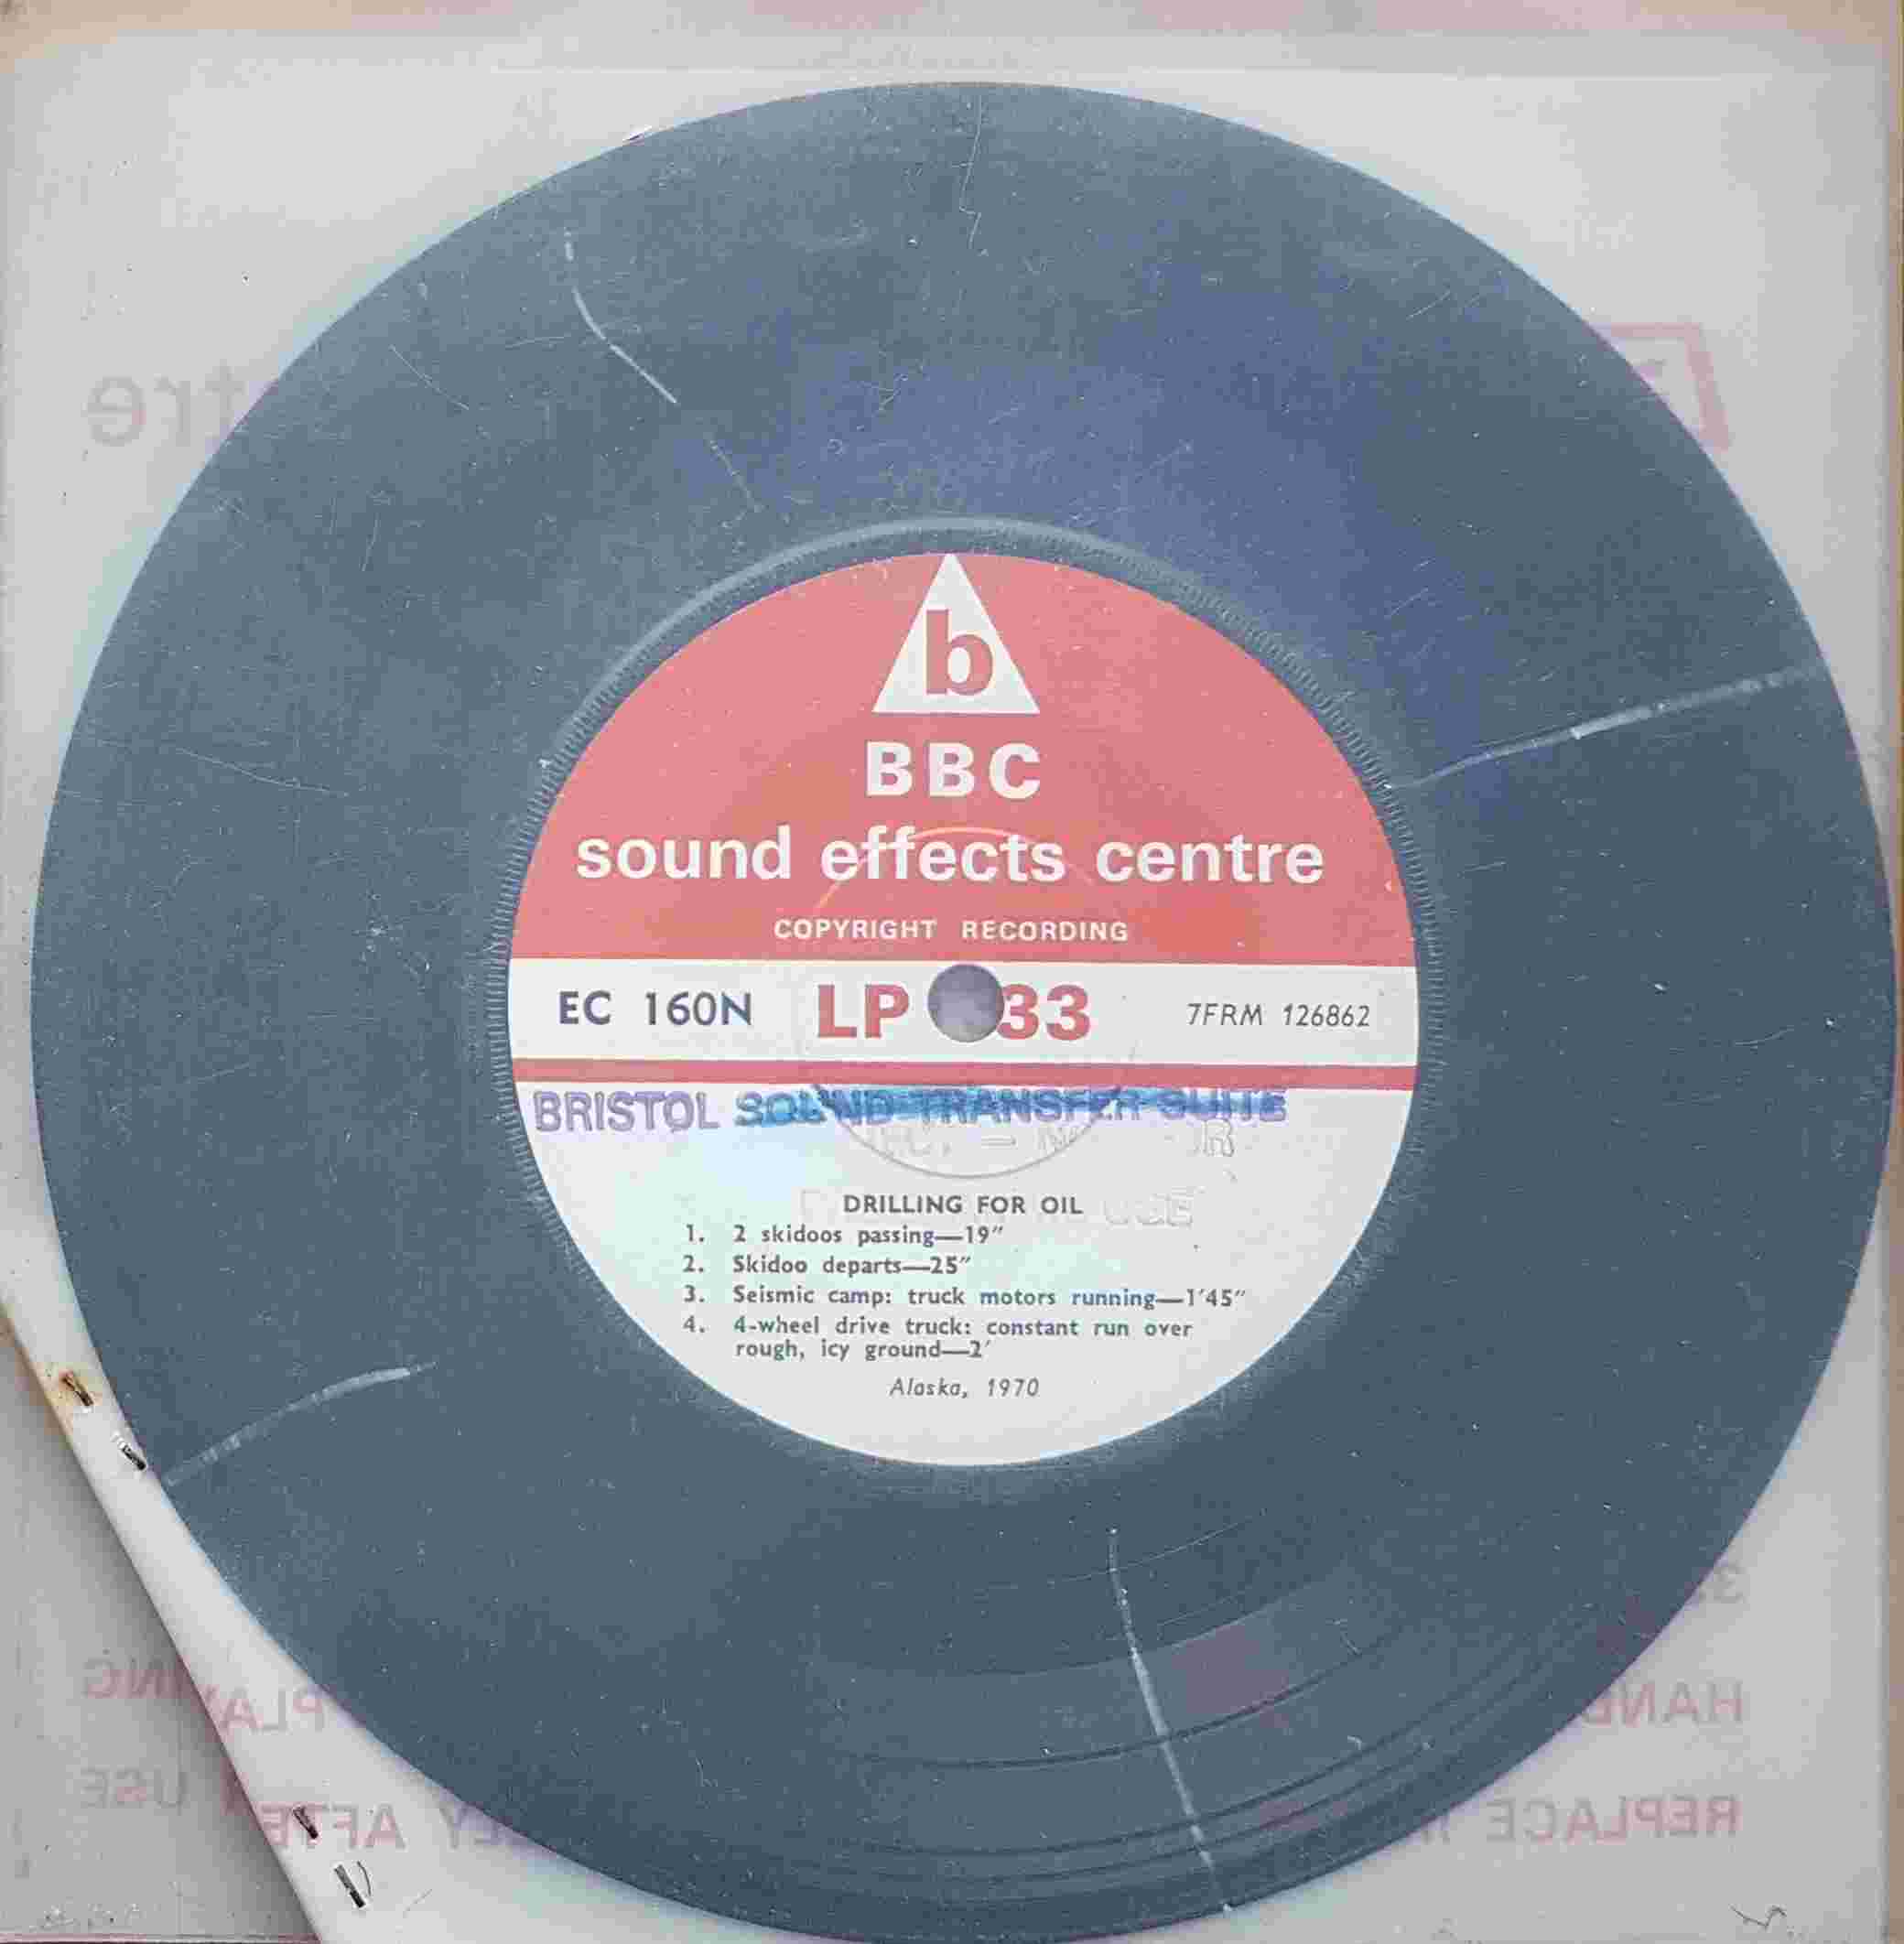 Picture of EC 160N Drilling for oil by artist Not registered from the BBC records and Tapes library